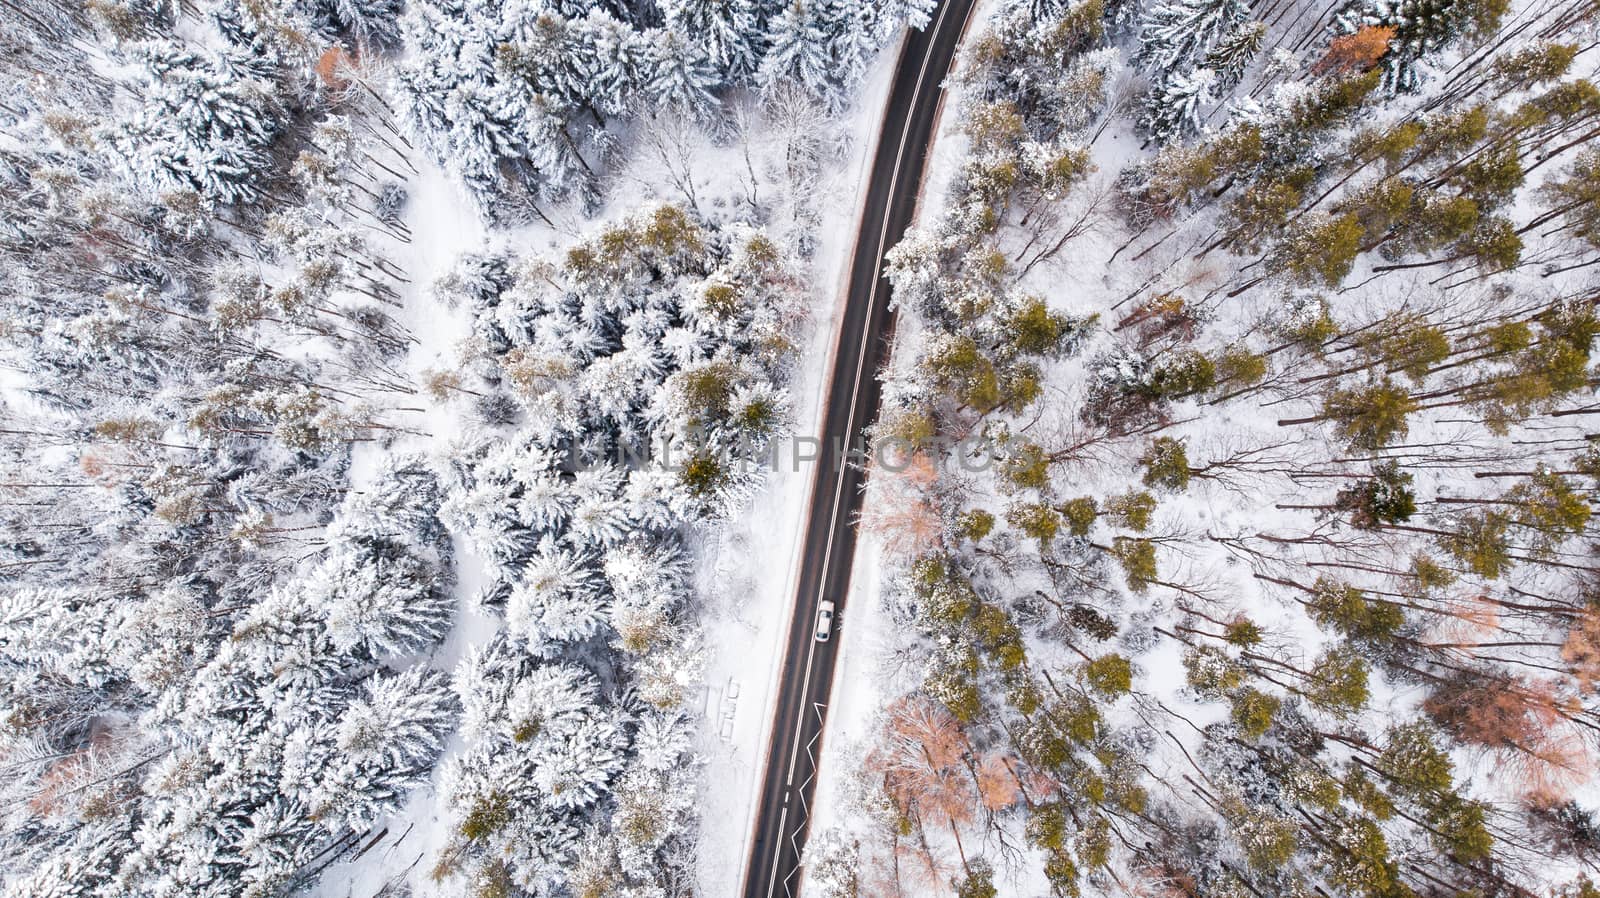 Car Drive Trough Snowy Forest in Winter Wonderland, Top Down Aerial View.